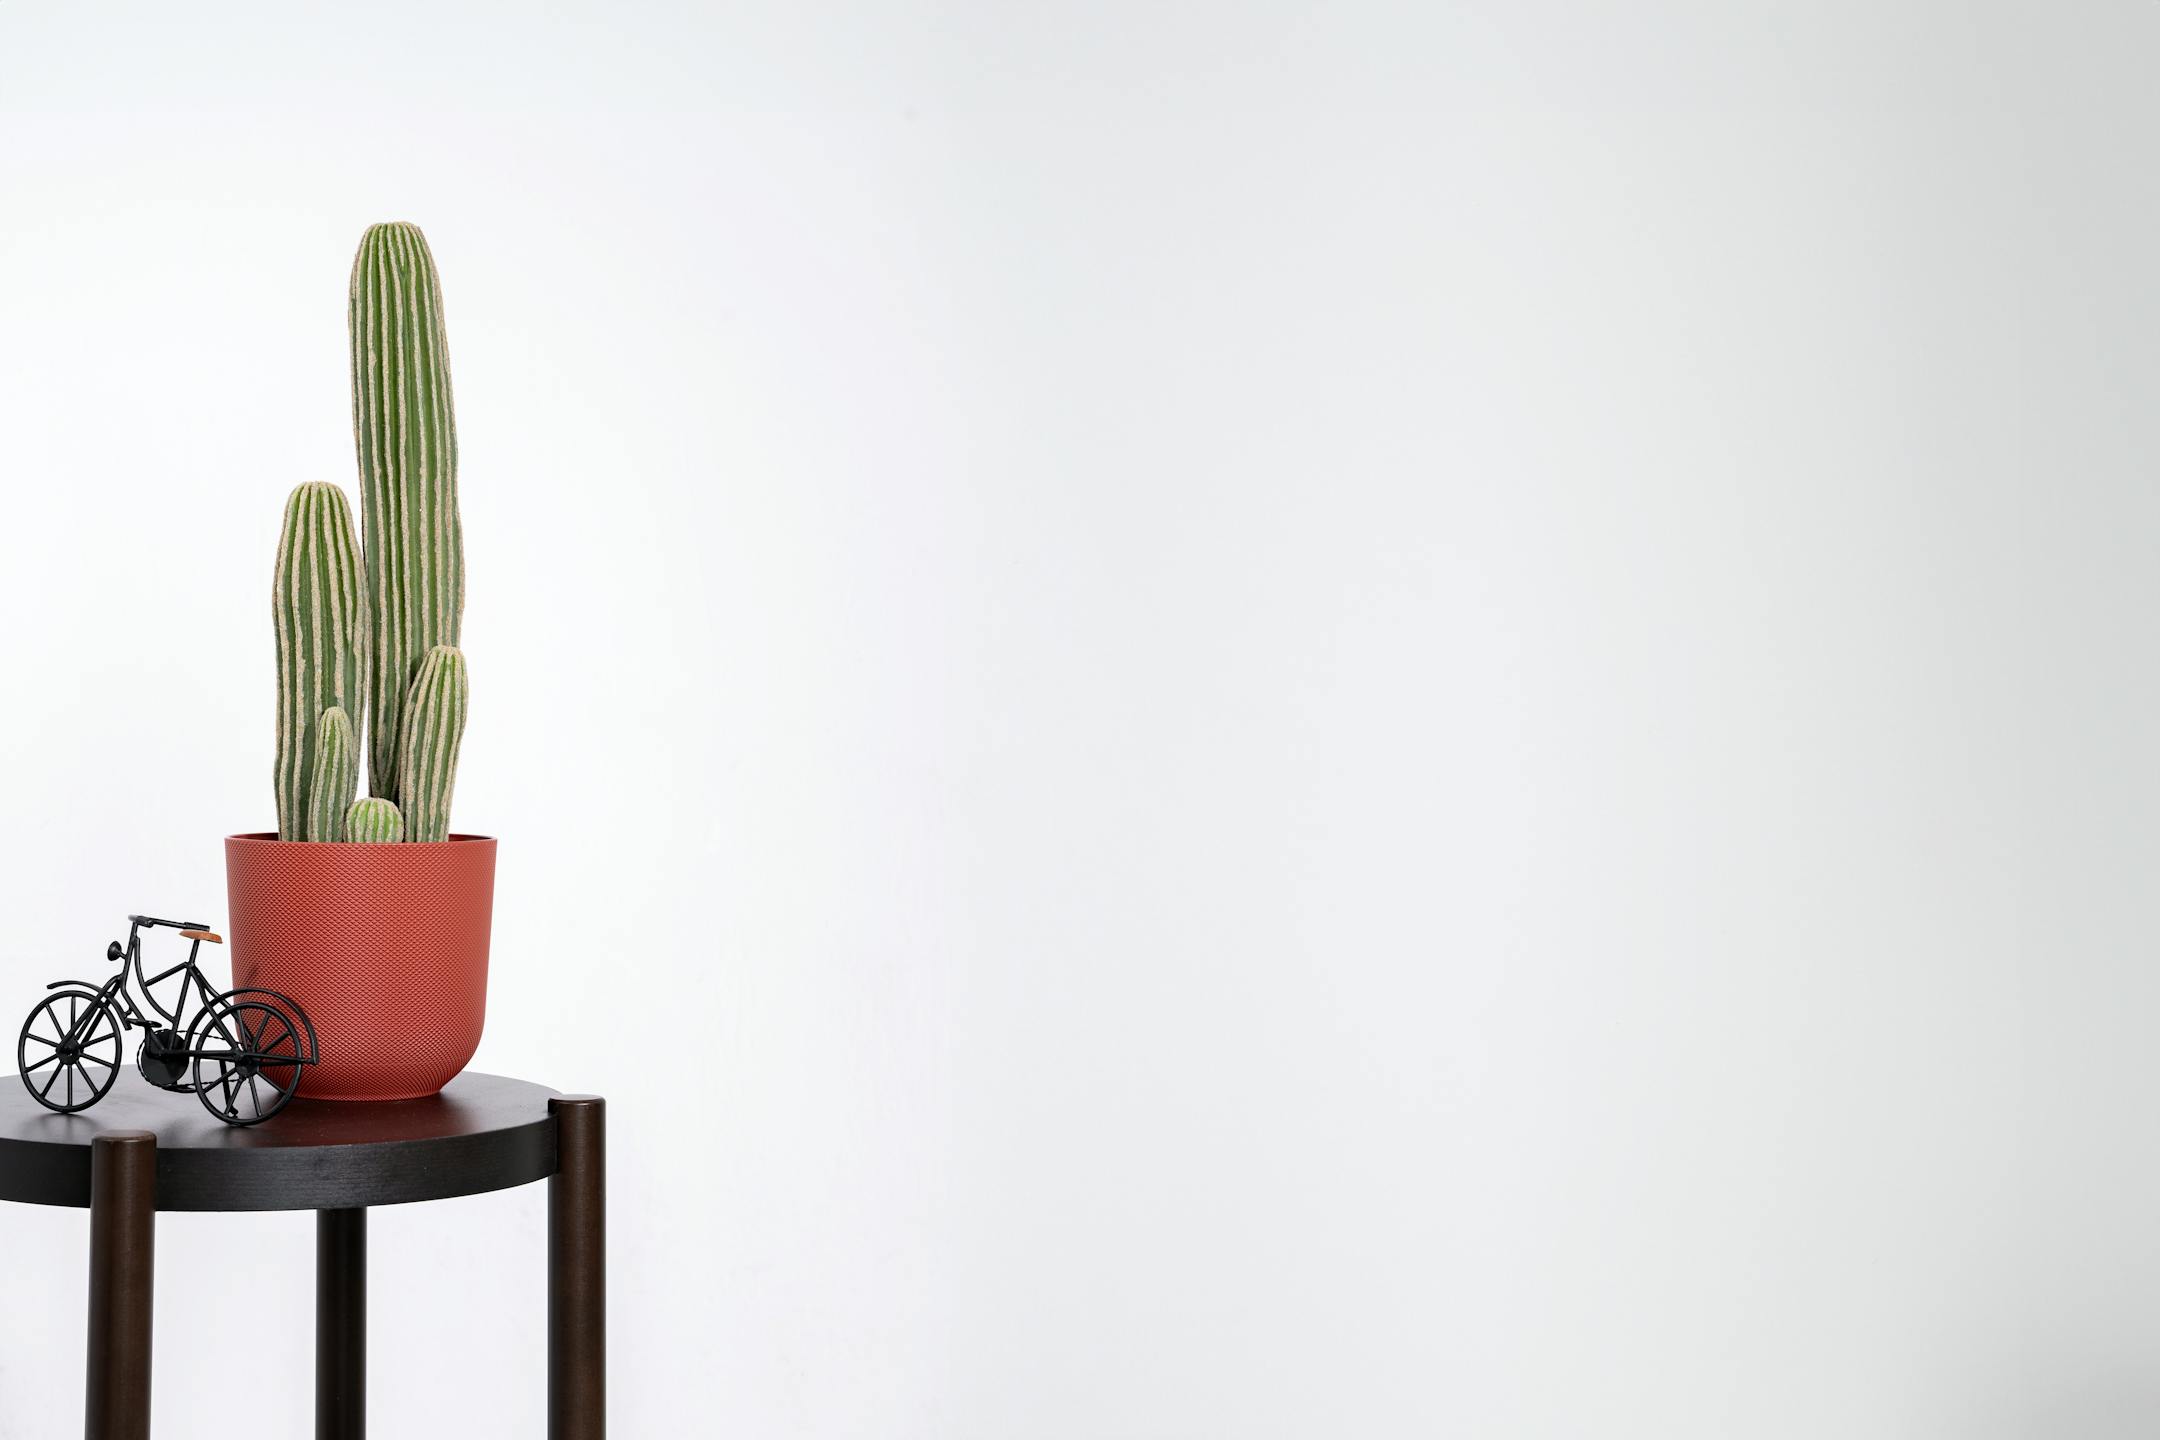 Artificial San Pedro cactus styled on table with ornament